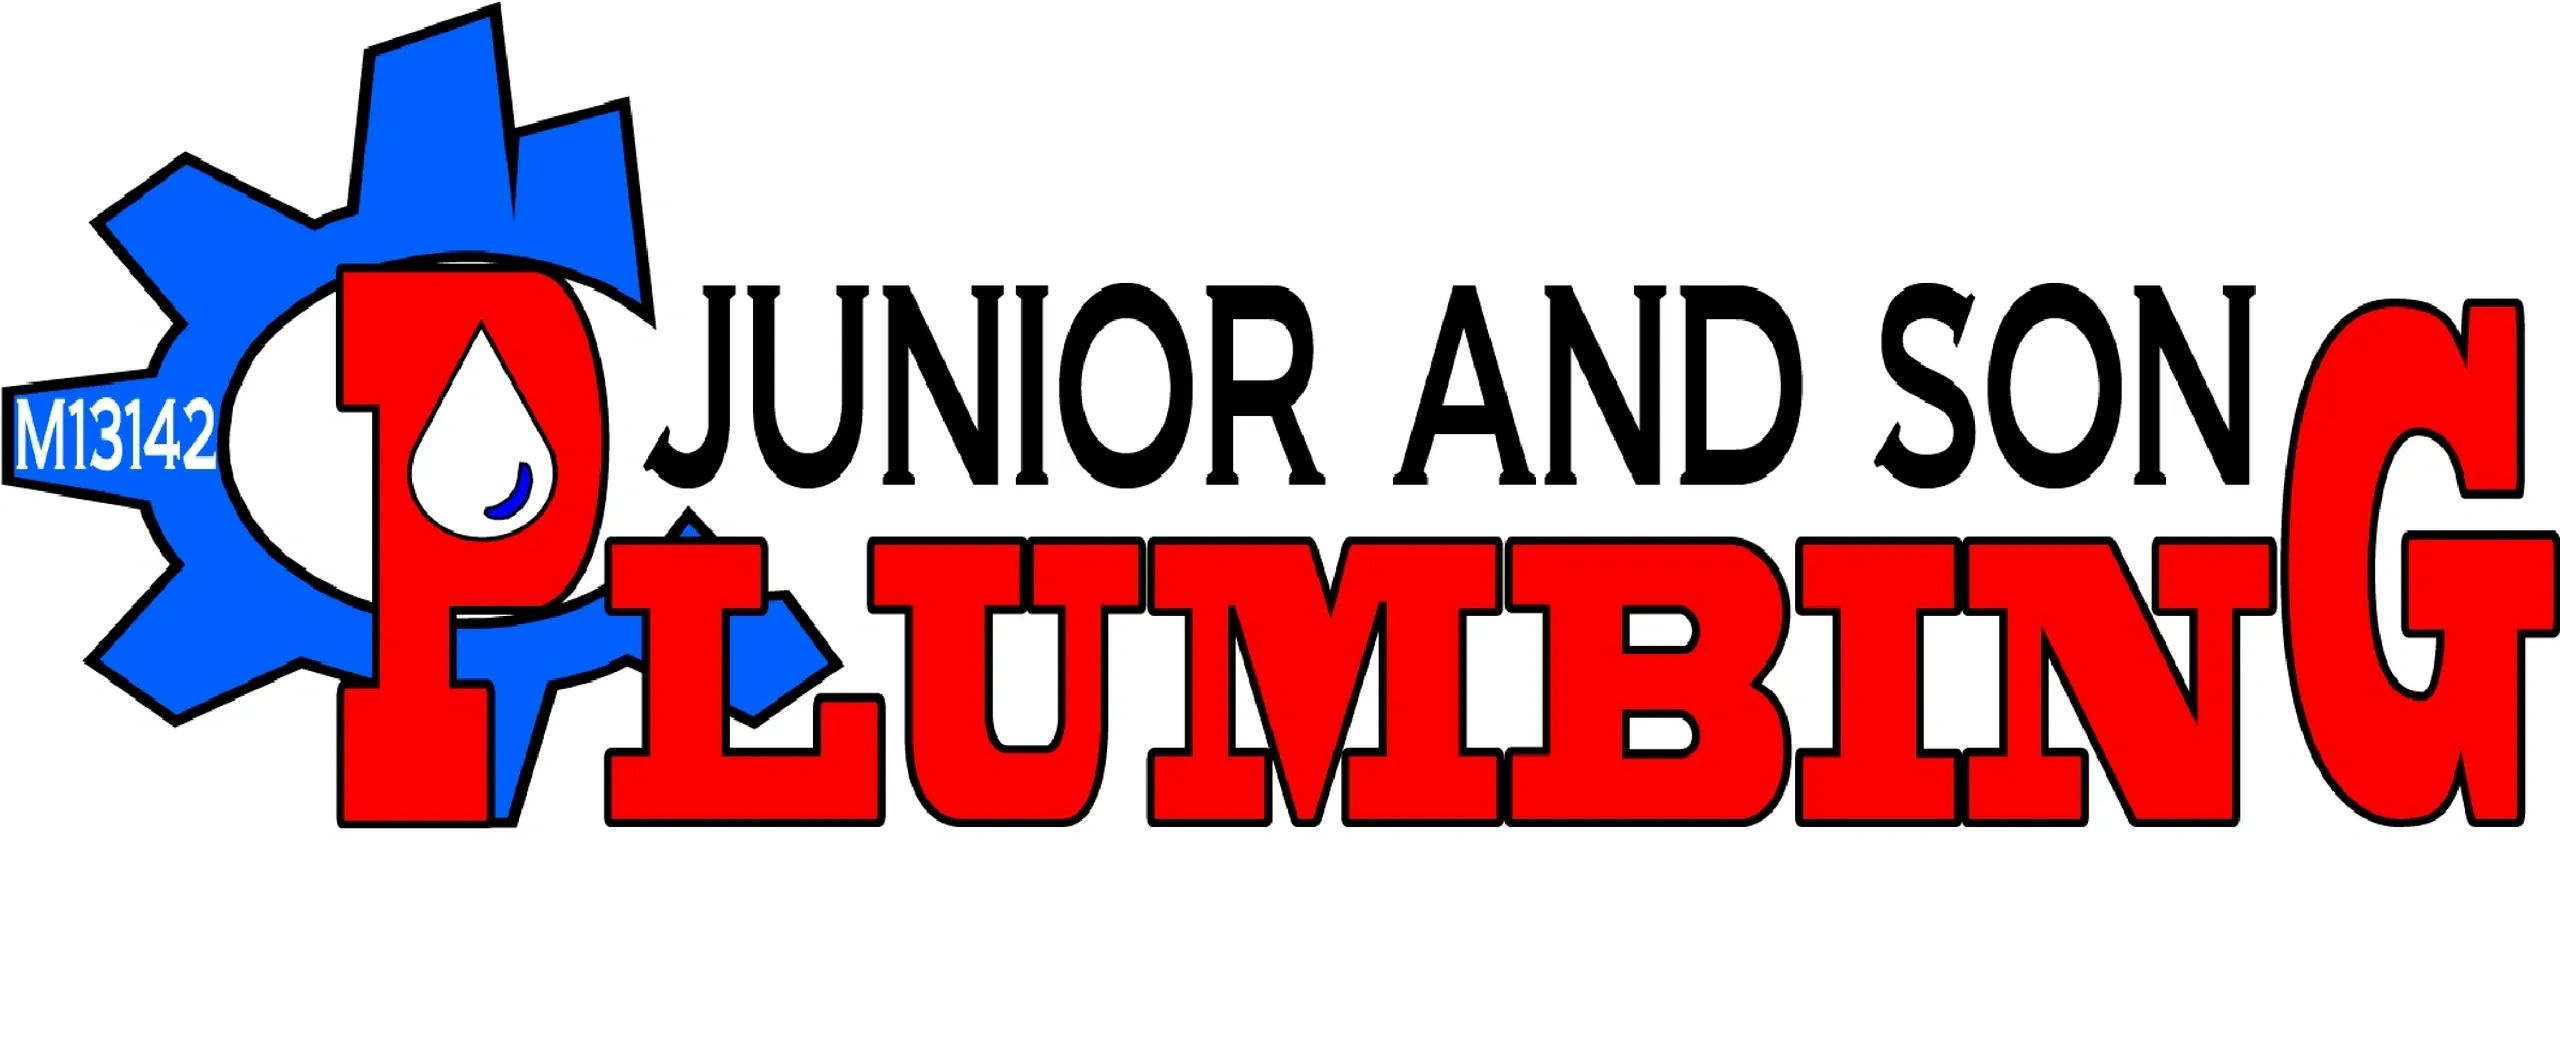 Junior and Son Plumbing, Plumbing service company in Terrell, Kaufman, Forney, Rockwall, and Quinlan